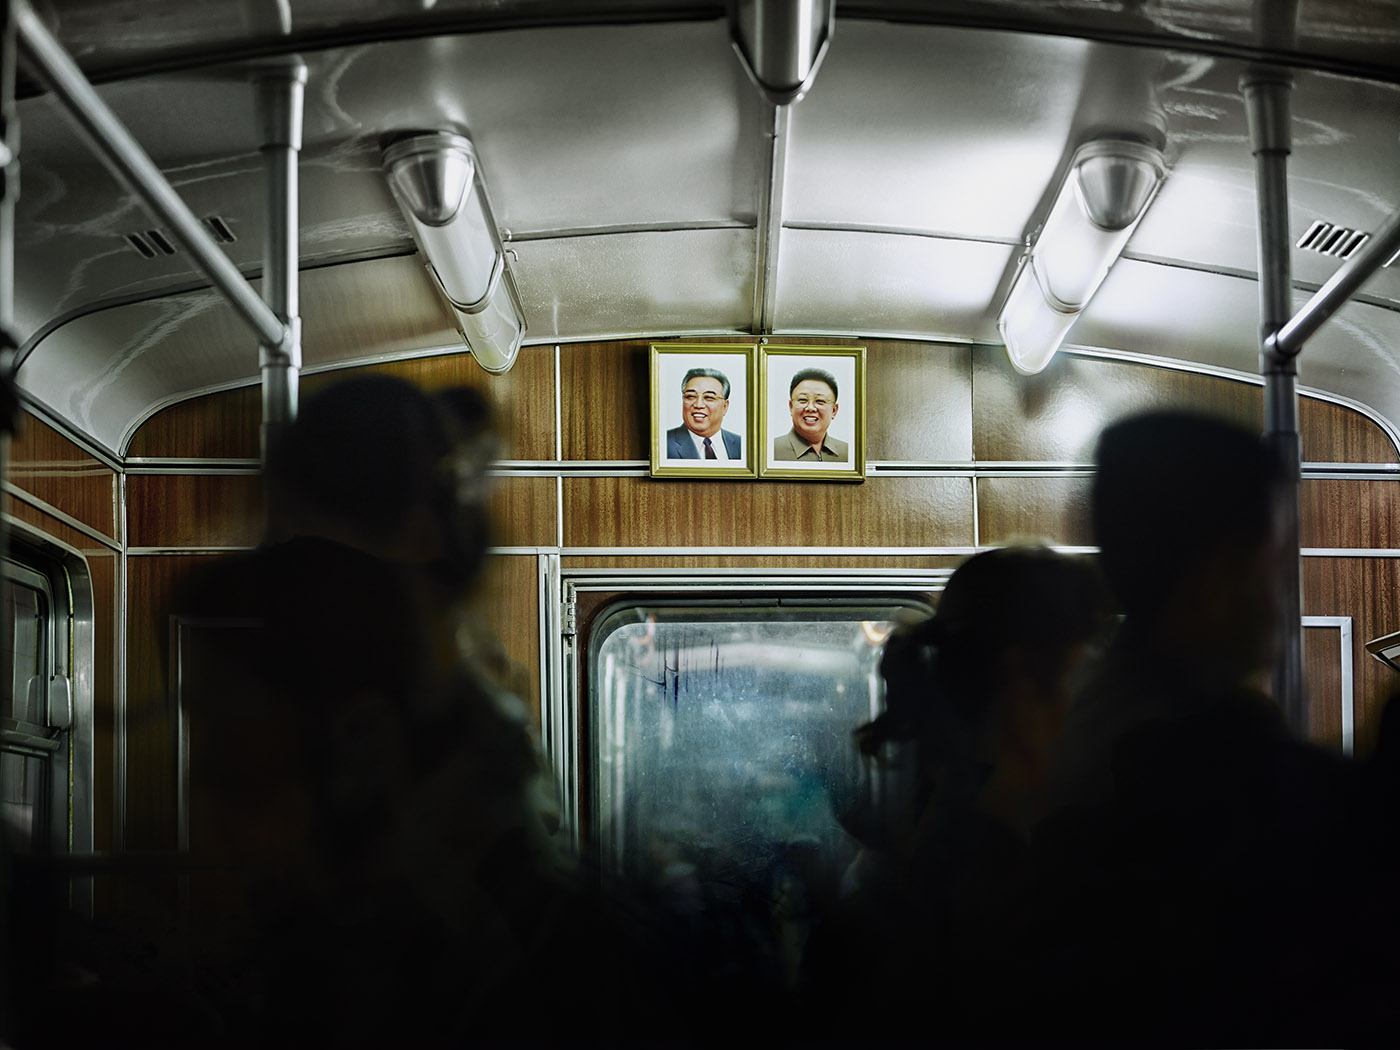 Portraits of the leaders in a Pyongyang Metro car The Pyongyang Metro opened in 1973 and currently consists of two lines